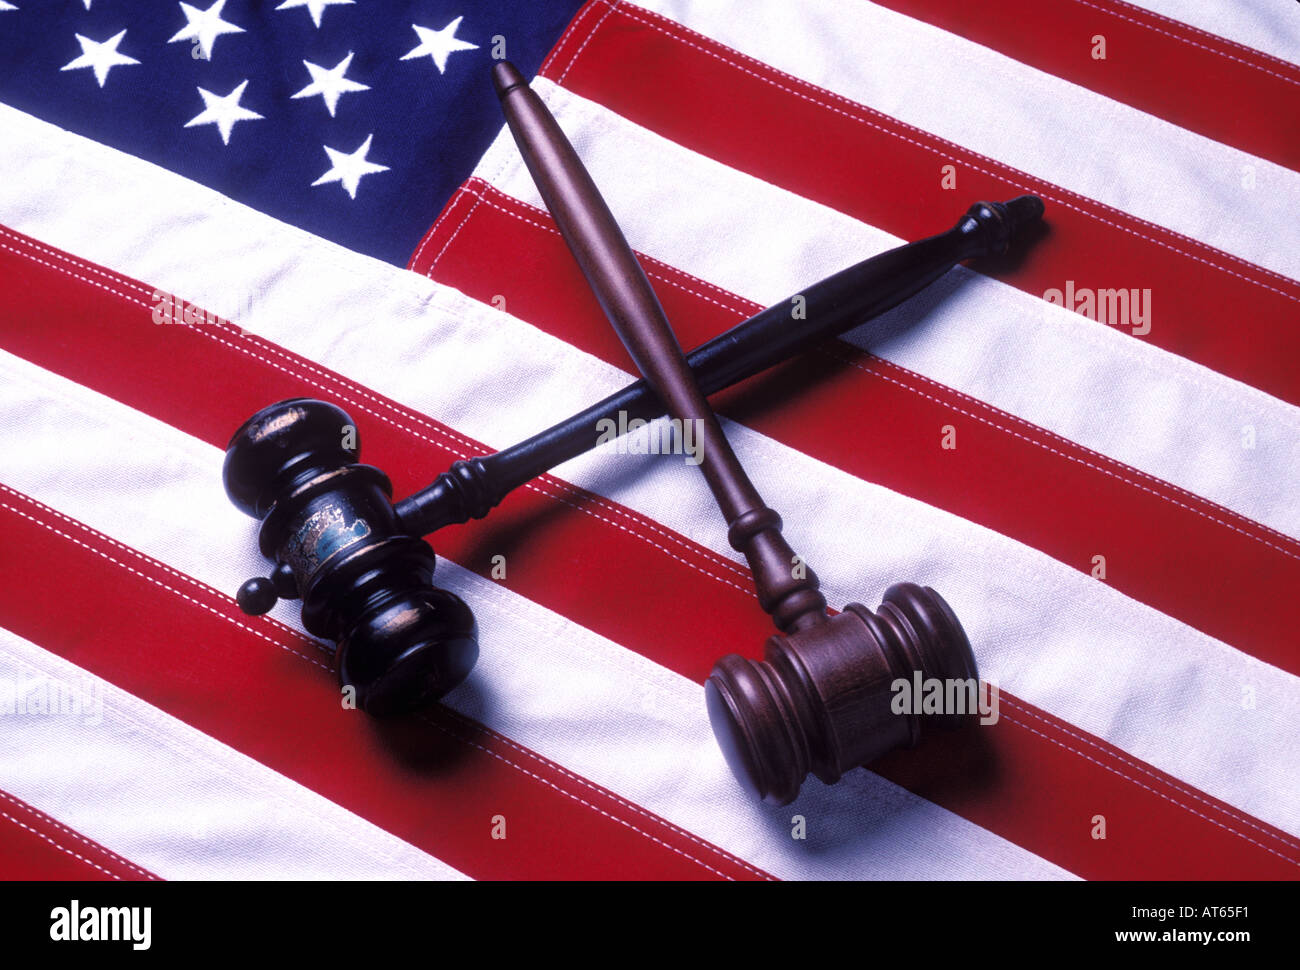 American flag and gavels Stock Photo